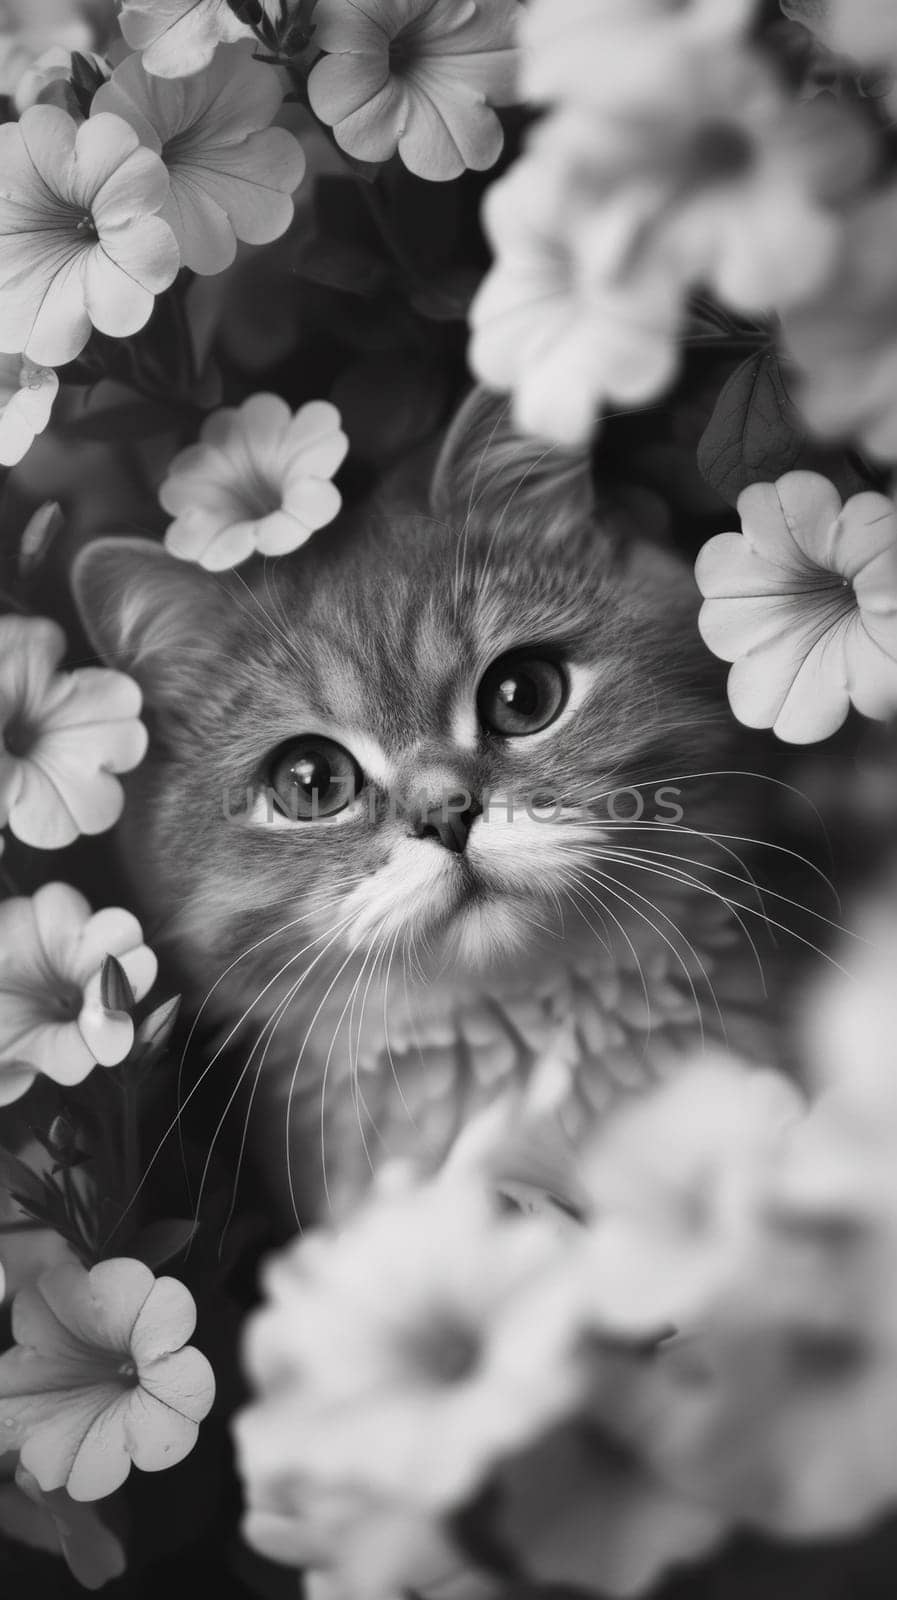 A cat peeking out from behind a bunch of flowers